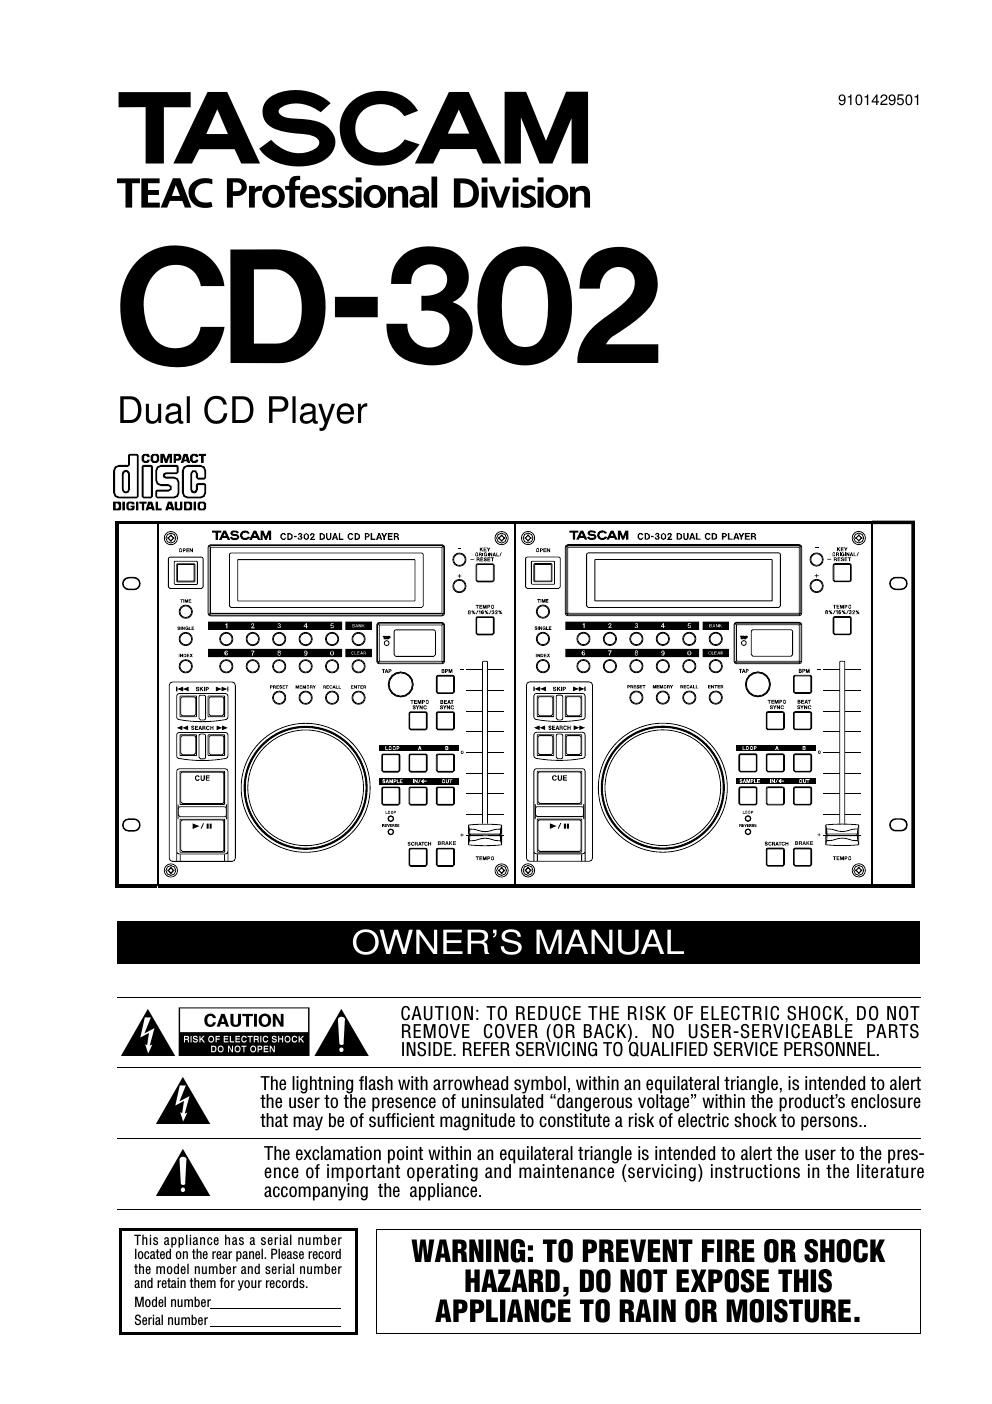 Tascam CD 302 Owners Manual